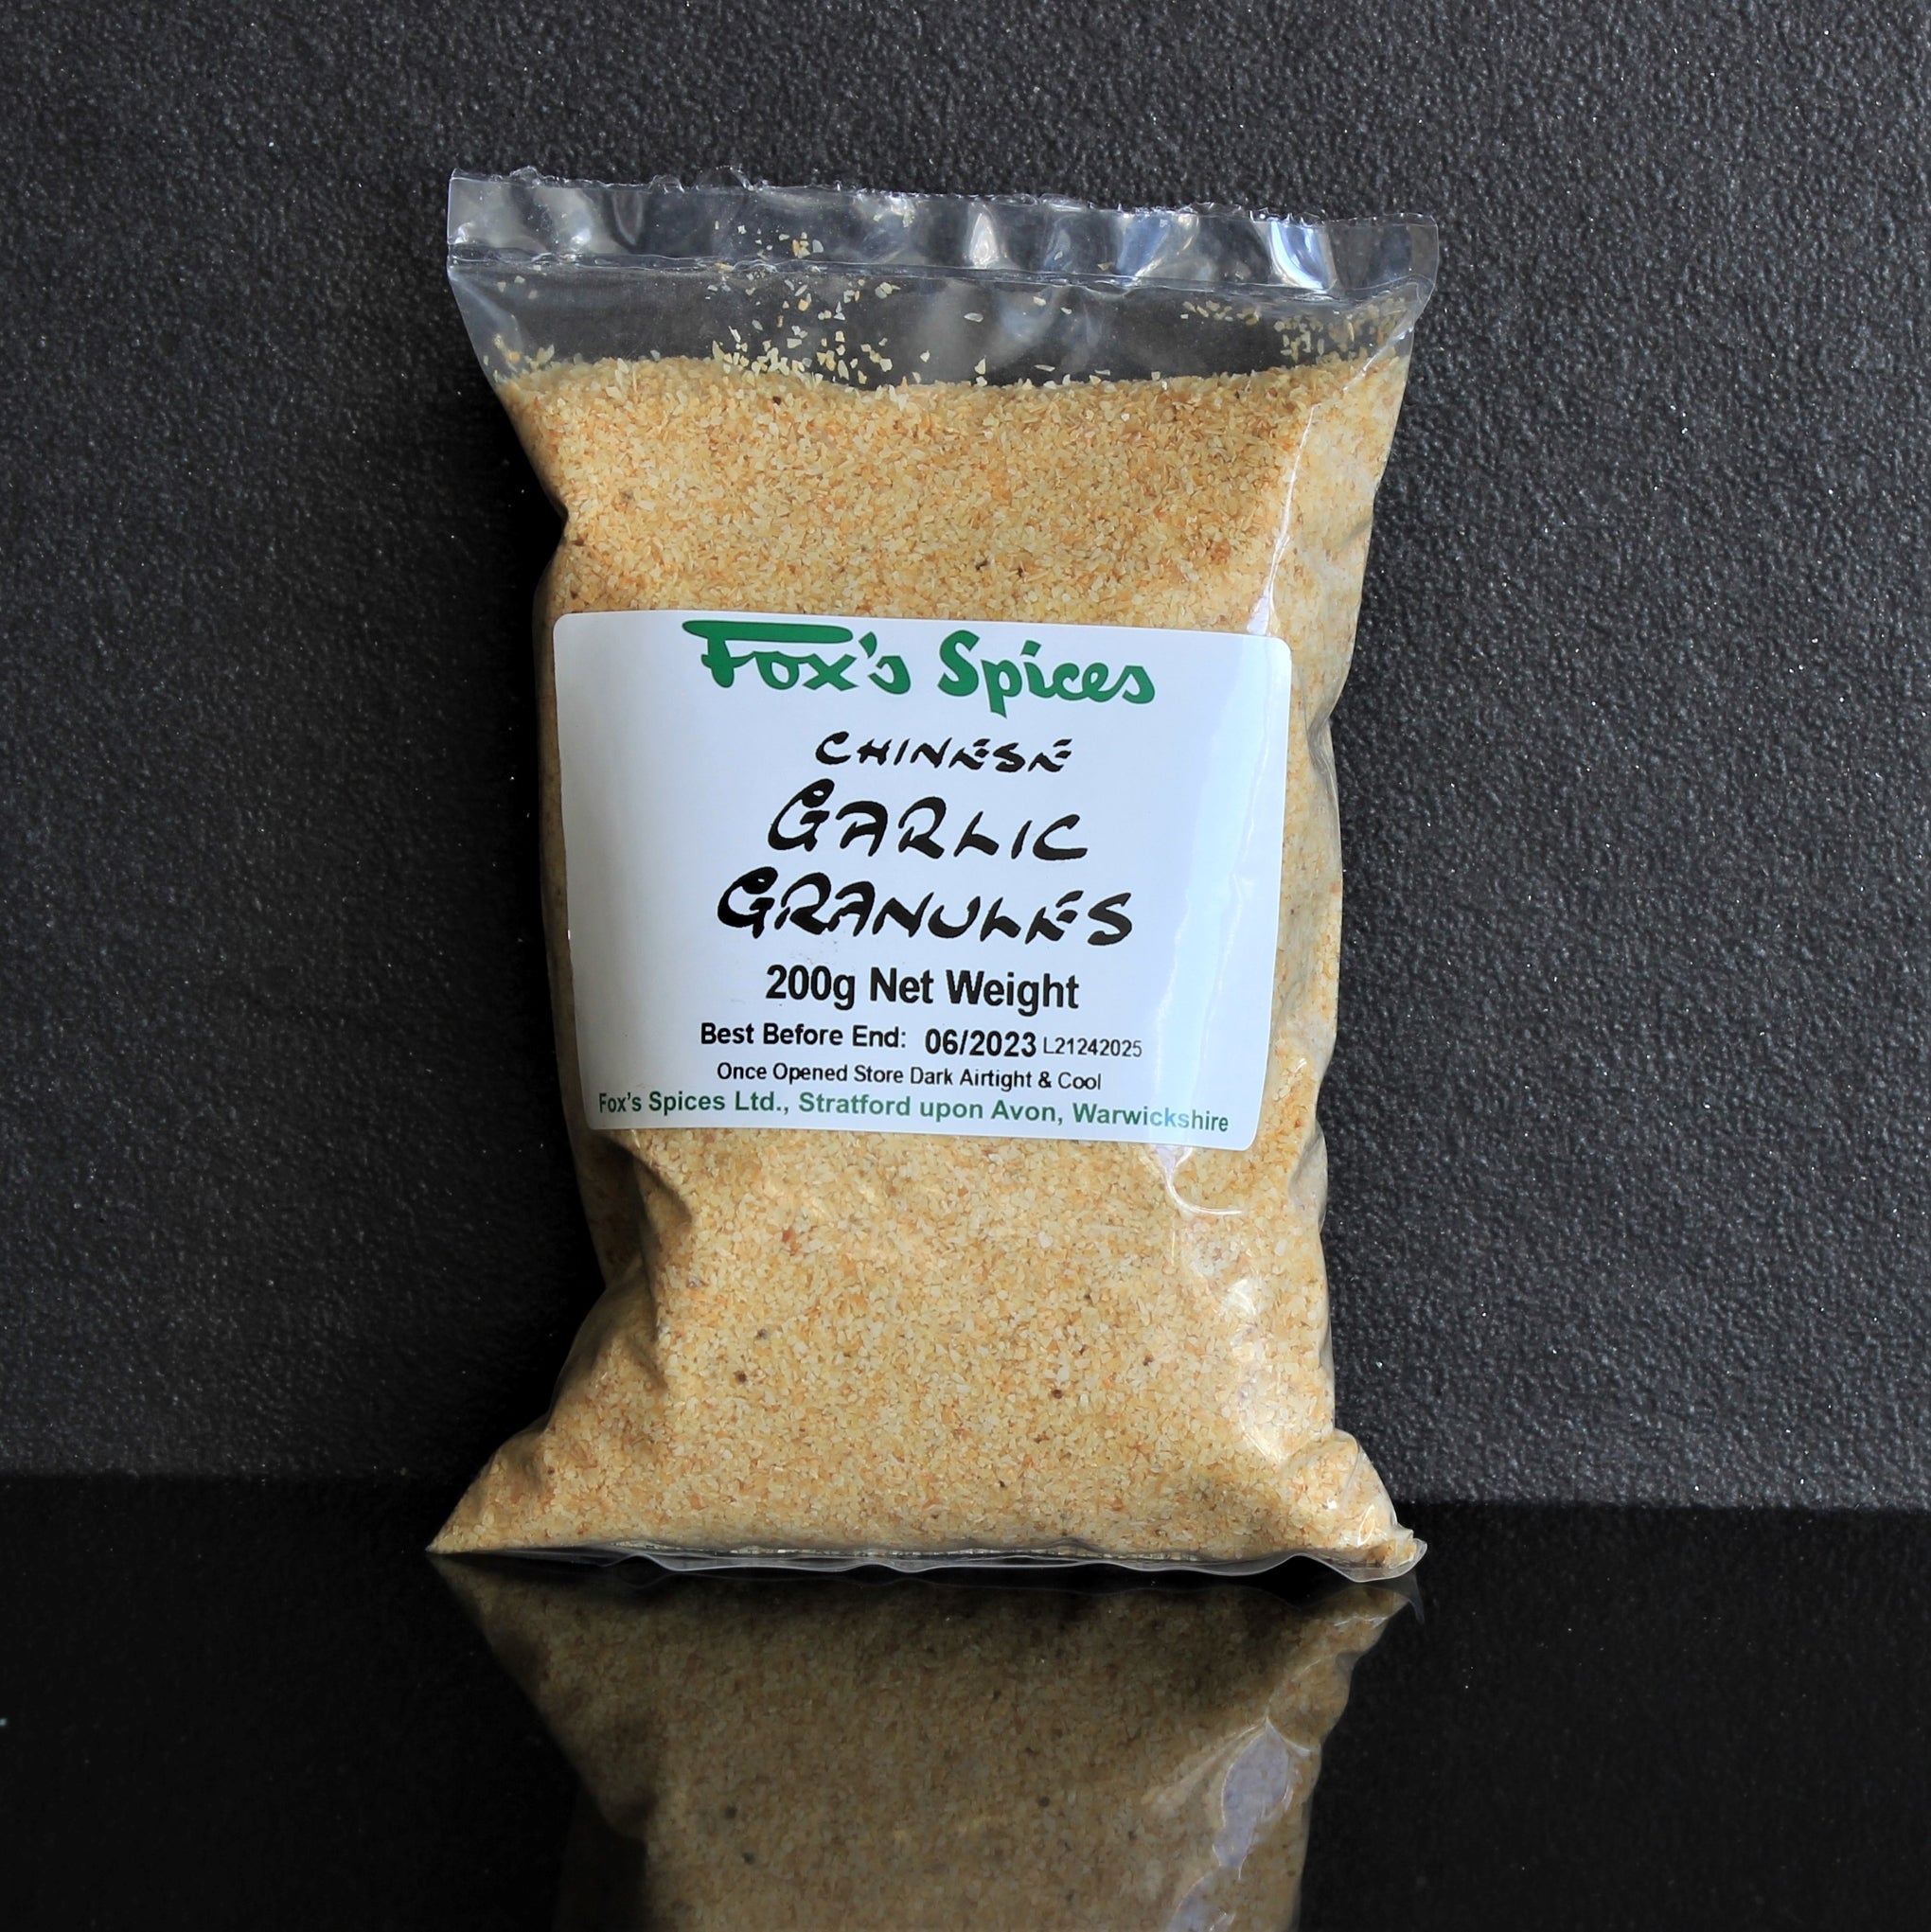 A 200g bag Garlic Granules from Fox's Spices